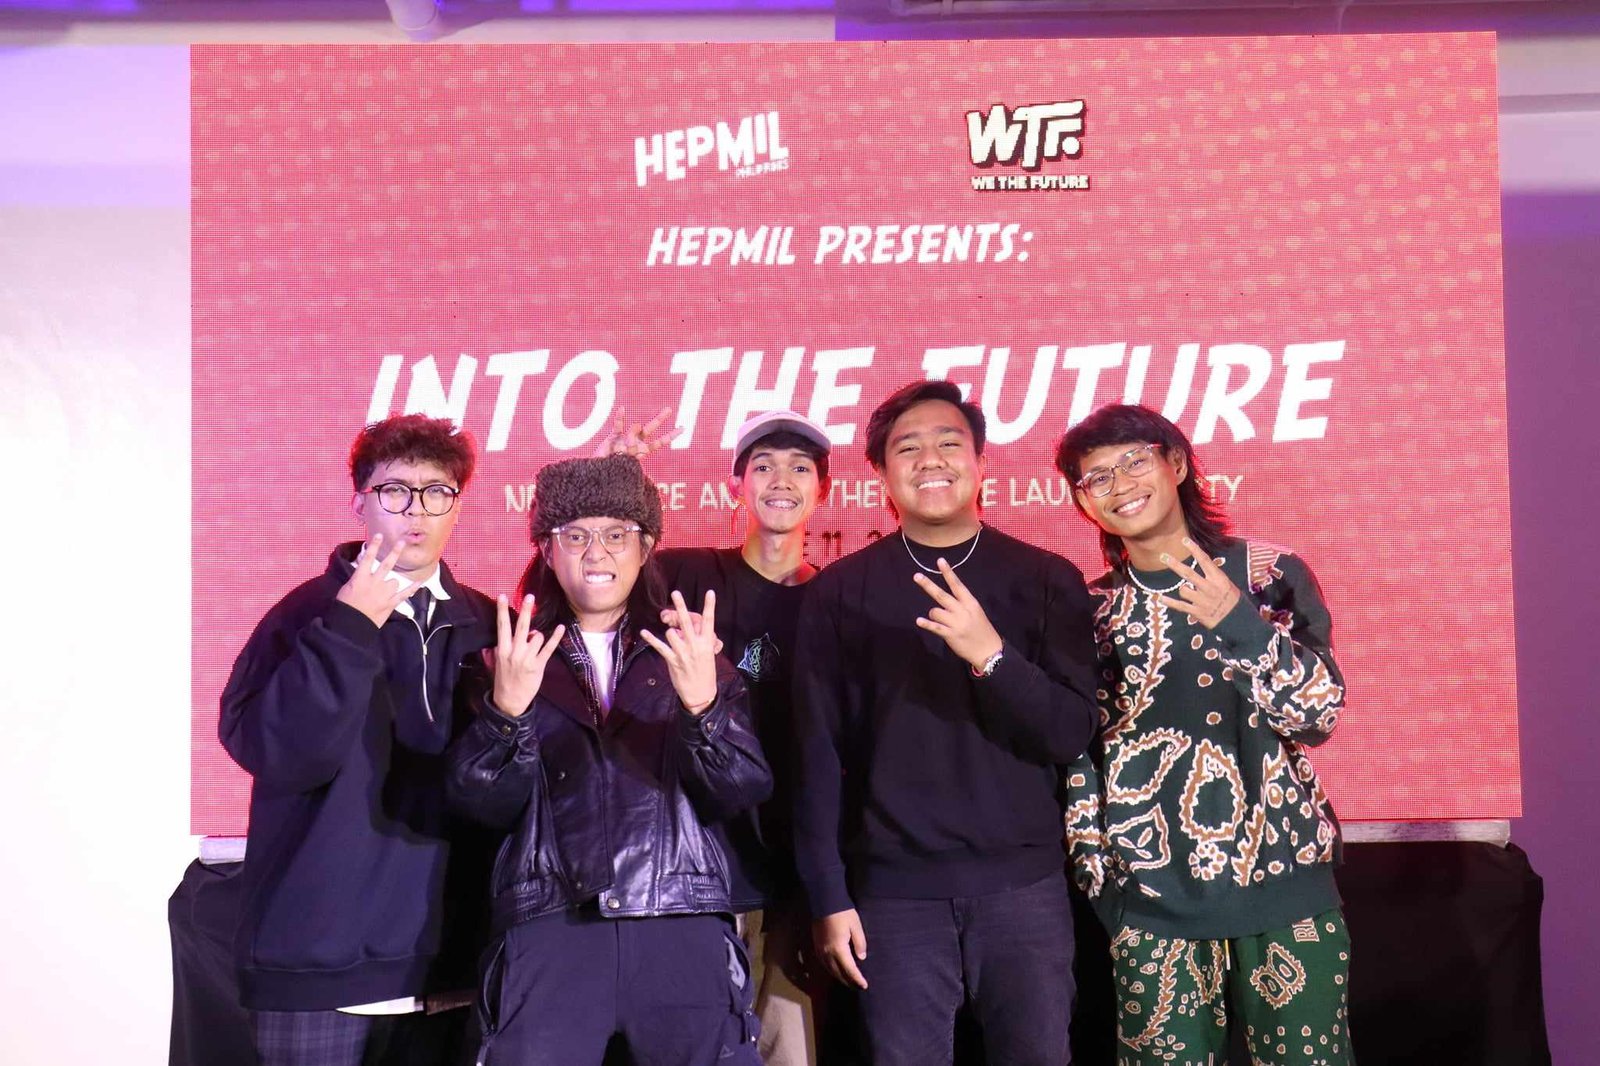 Hepmil Philippines opens new production hub to expand content creation capabilities, reveals latest ‘We The Future’ show